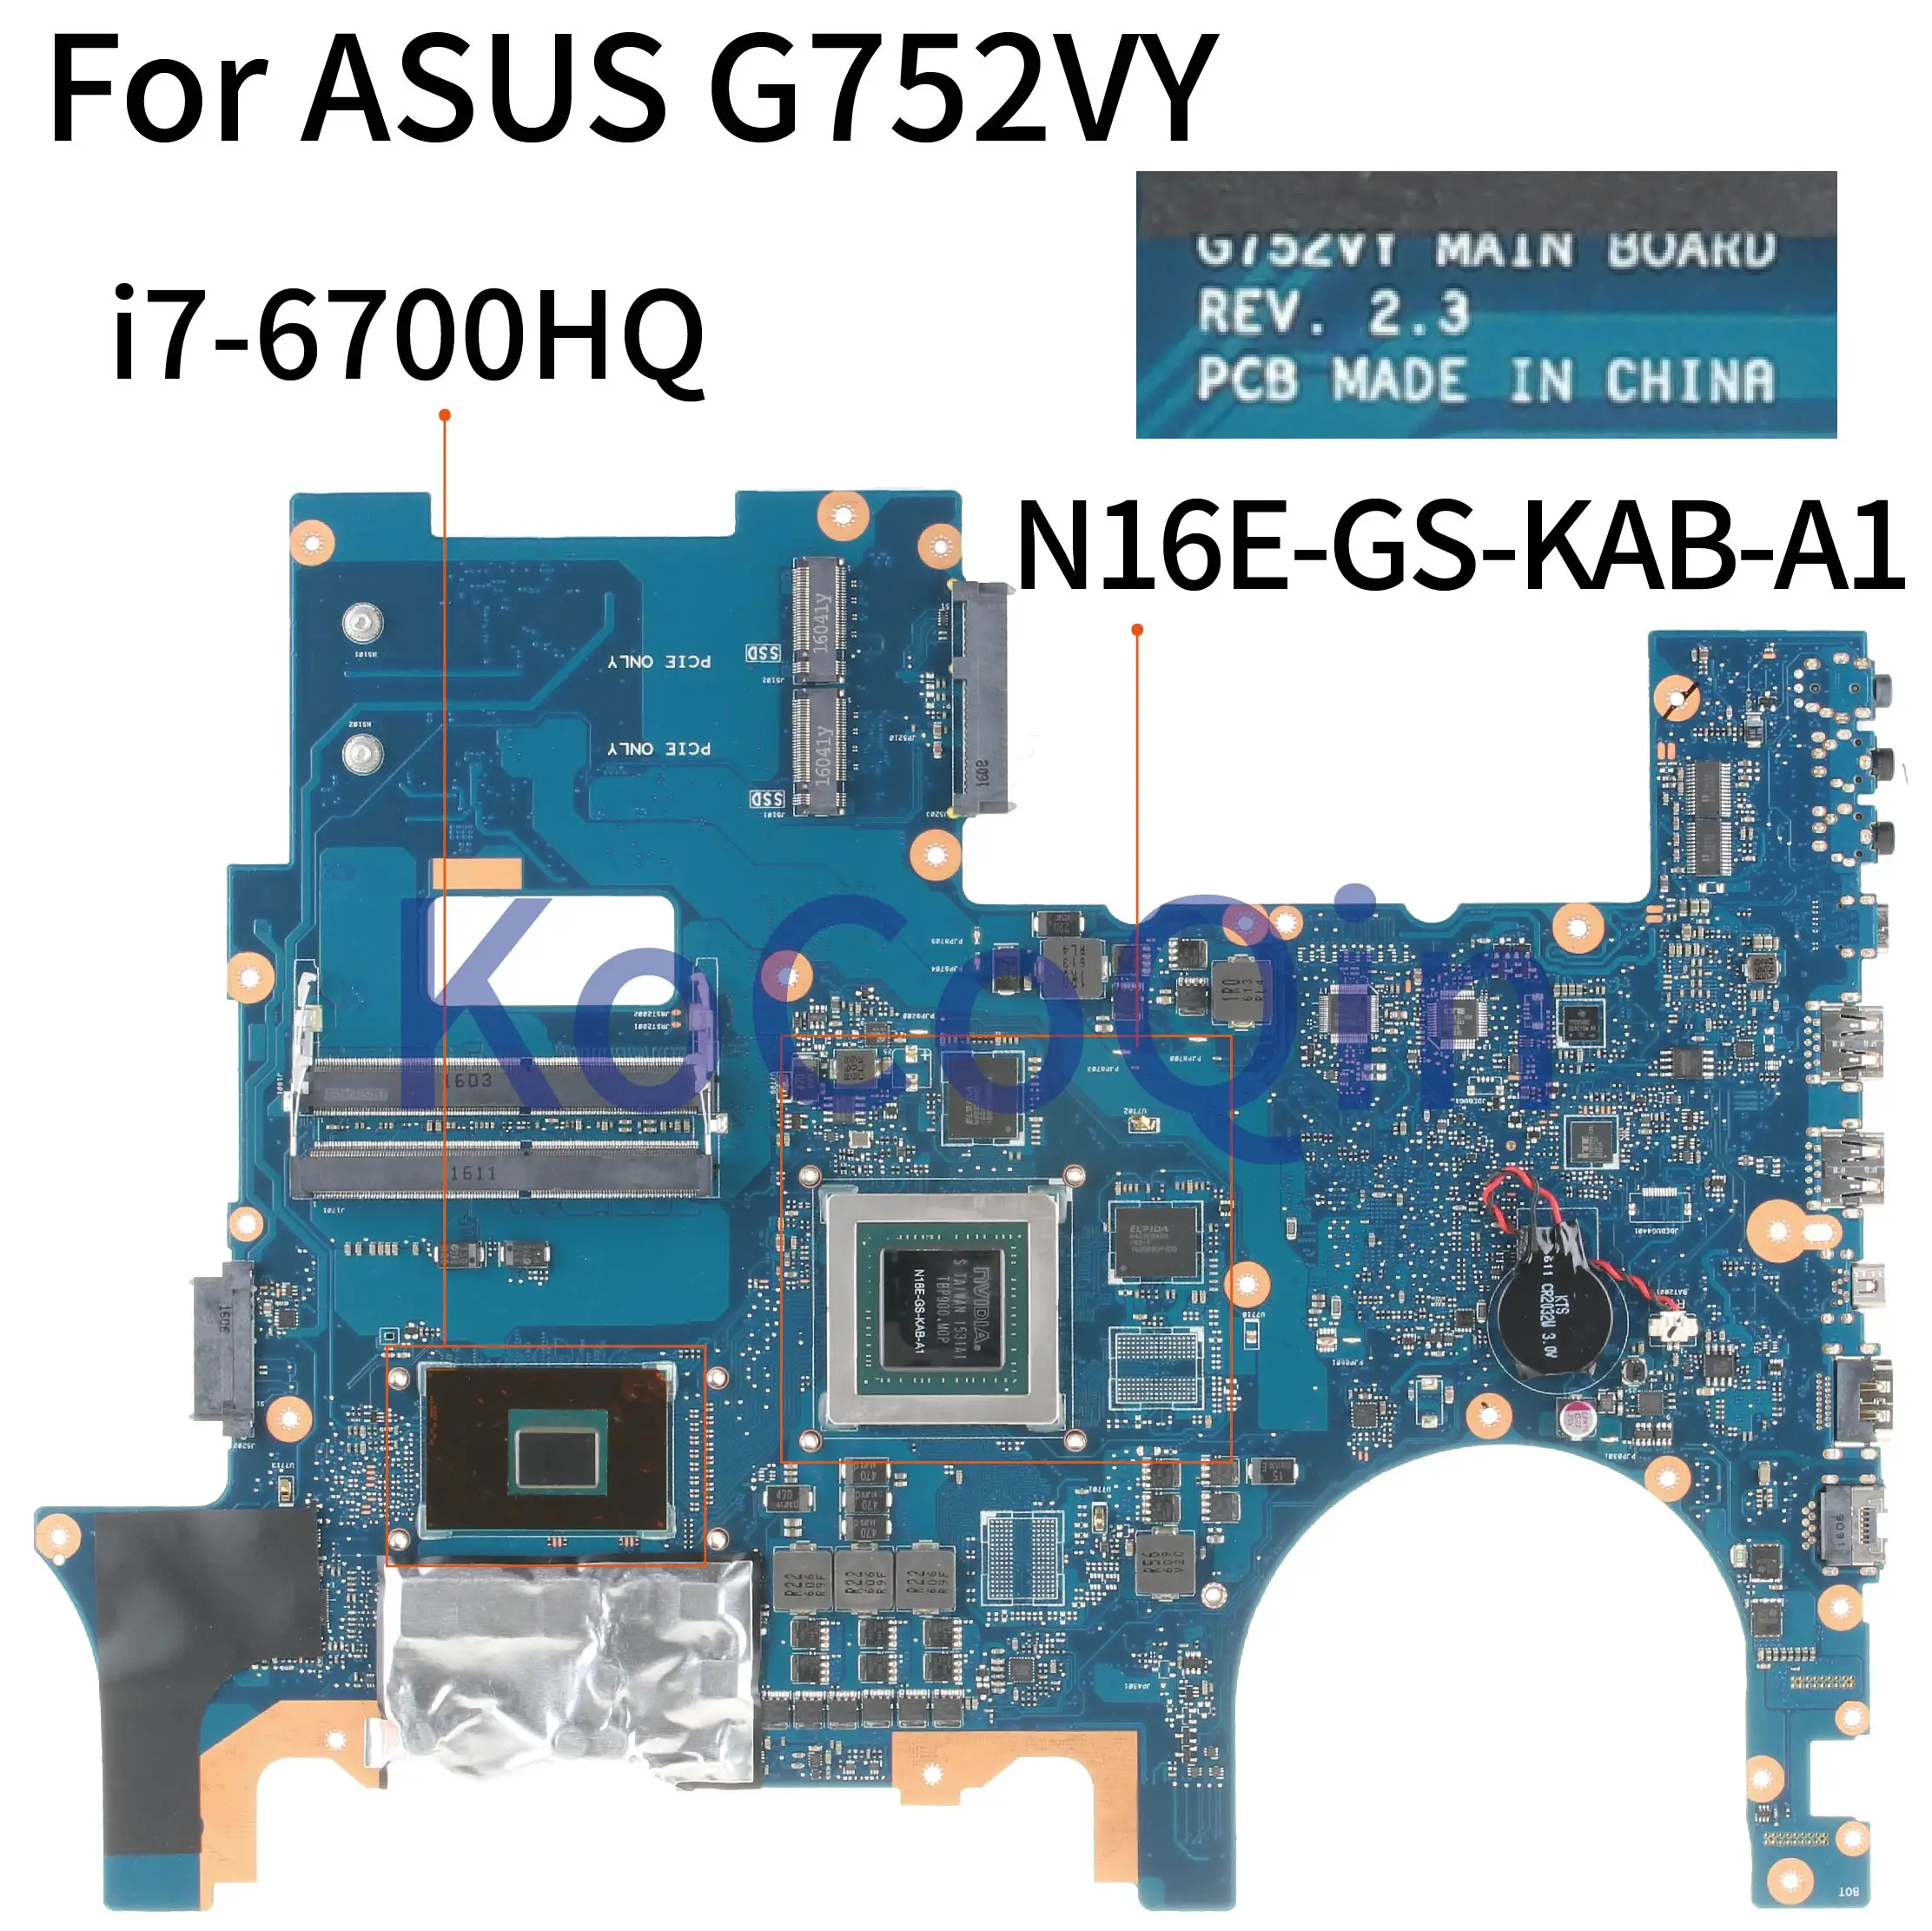 

G752VY For ASUS ROG G752VL G752VT G752V G752VY I7-6700HQ SR2FQ Notebook Mainboard REV:2.3 N16E-GS-KAB-A1 Laptop Motherboard